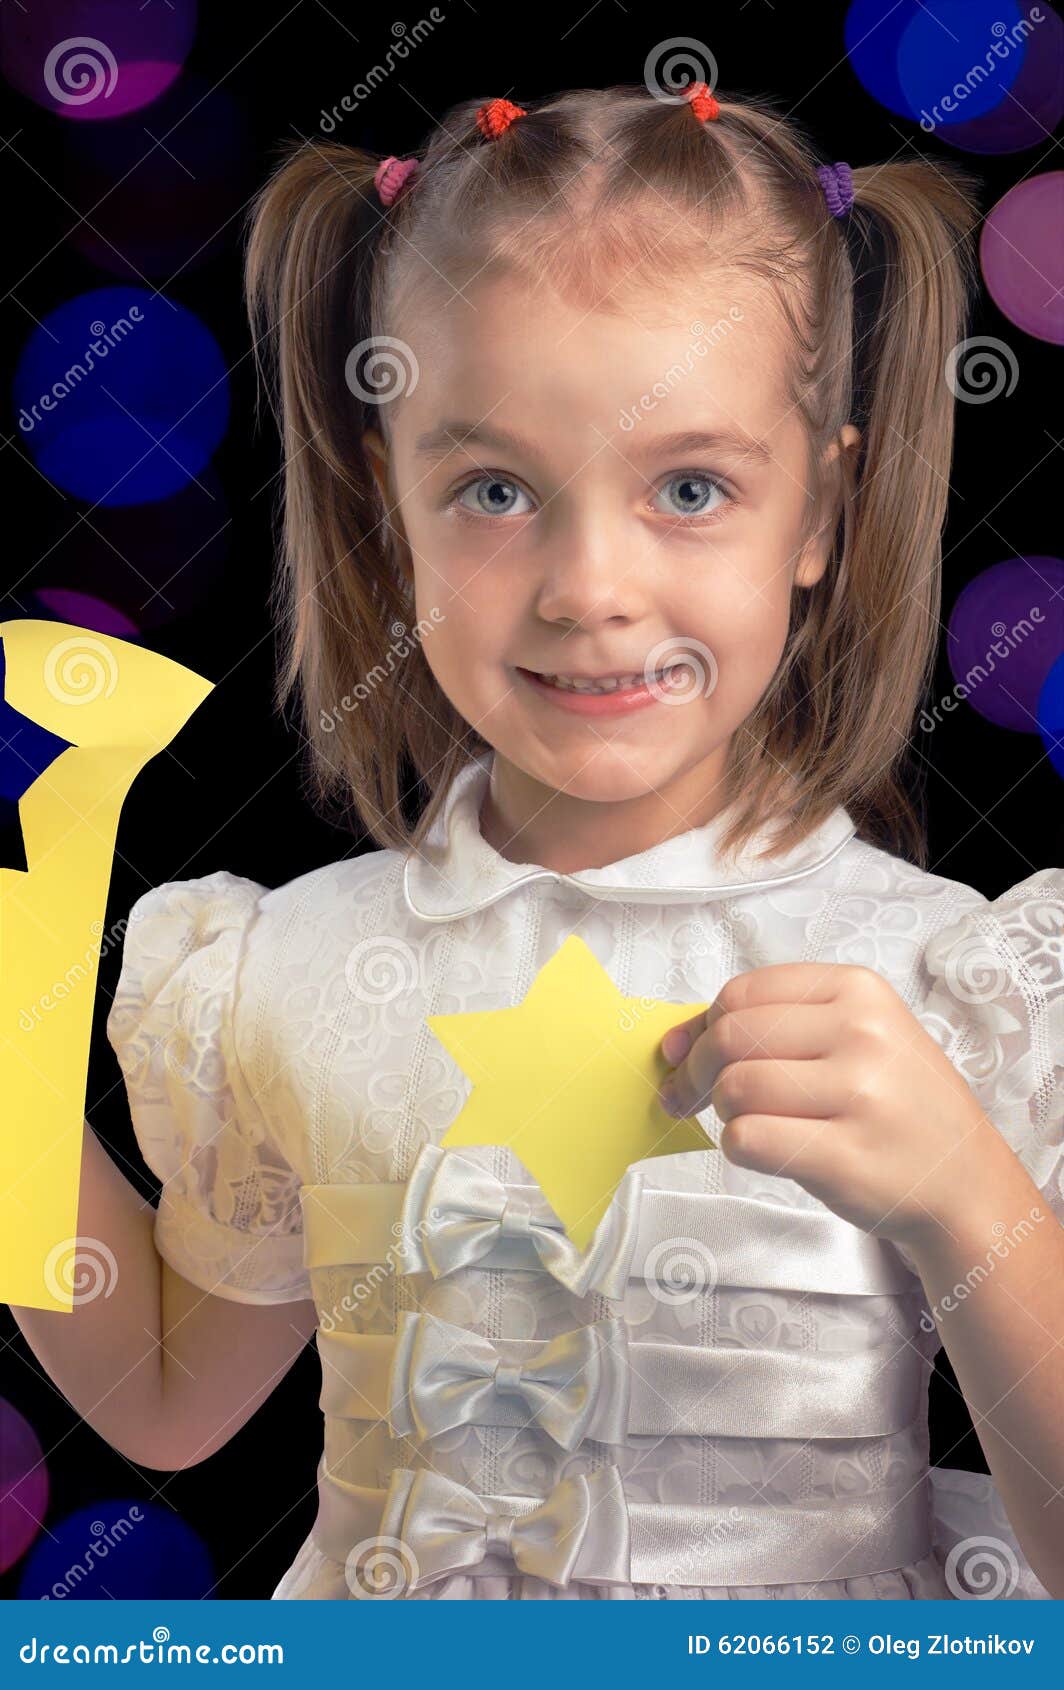 Little girl happy cutting paper figures for Christmas against black background with blurred lights - little-girl-happy-cutting-paper-figures-christmas-against-black-background-blurred-lights-color-62066152